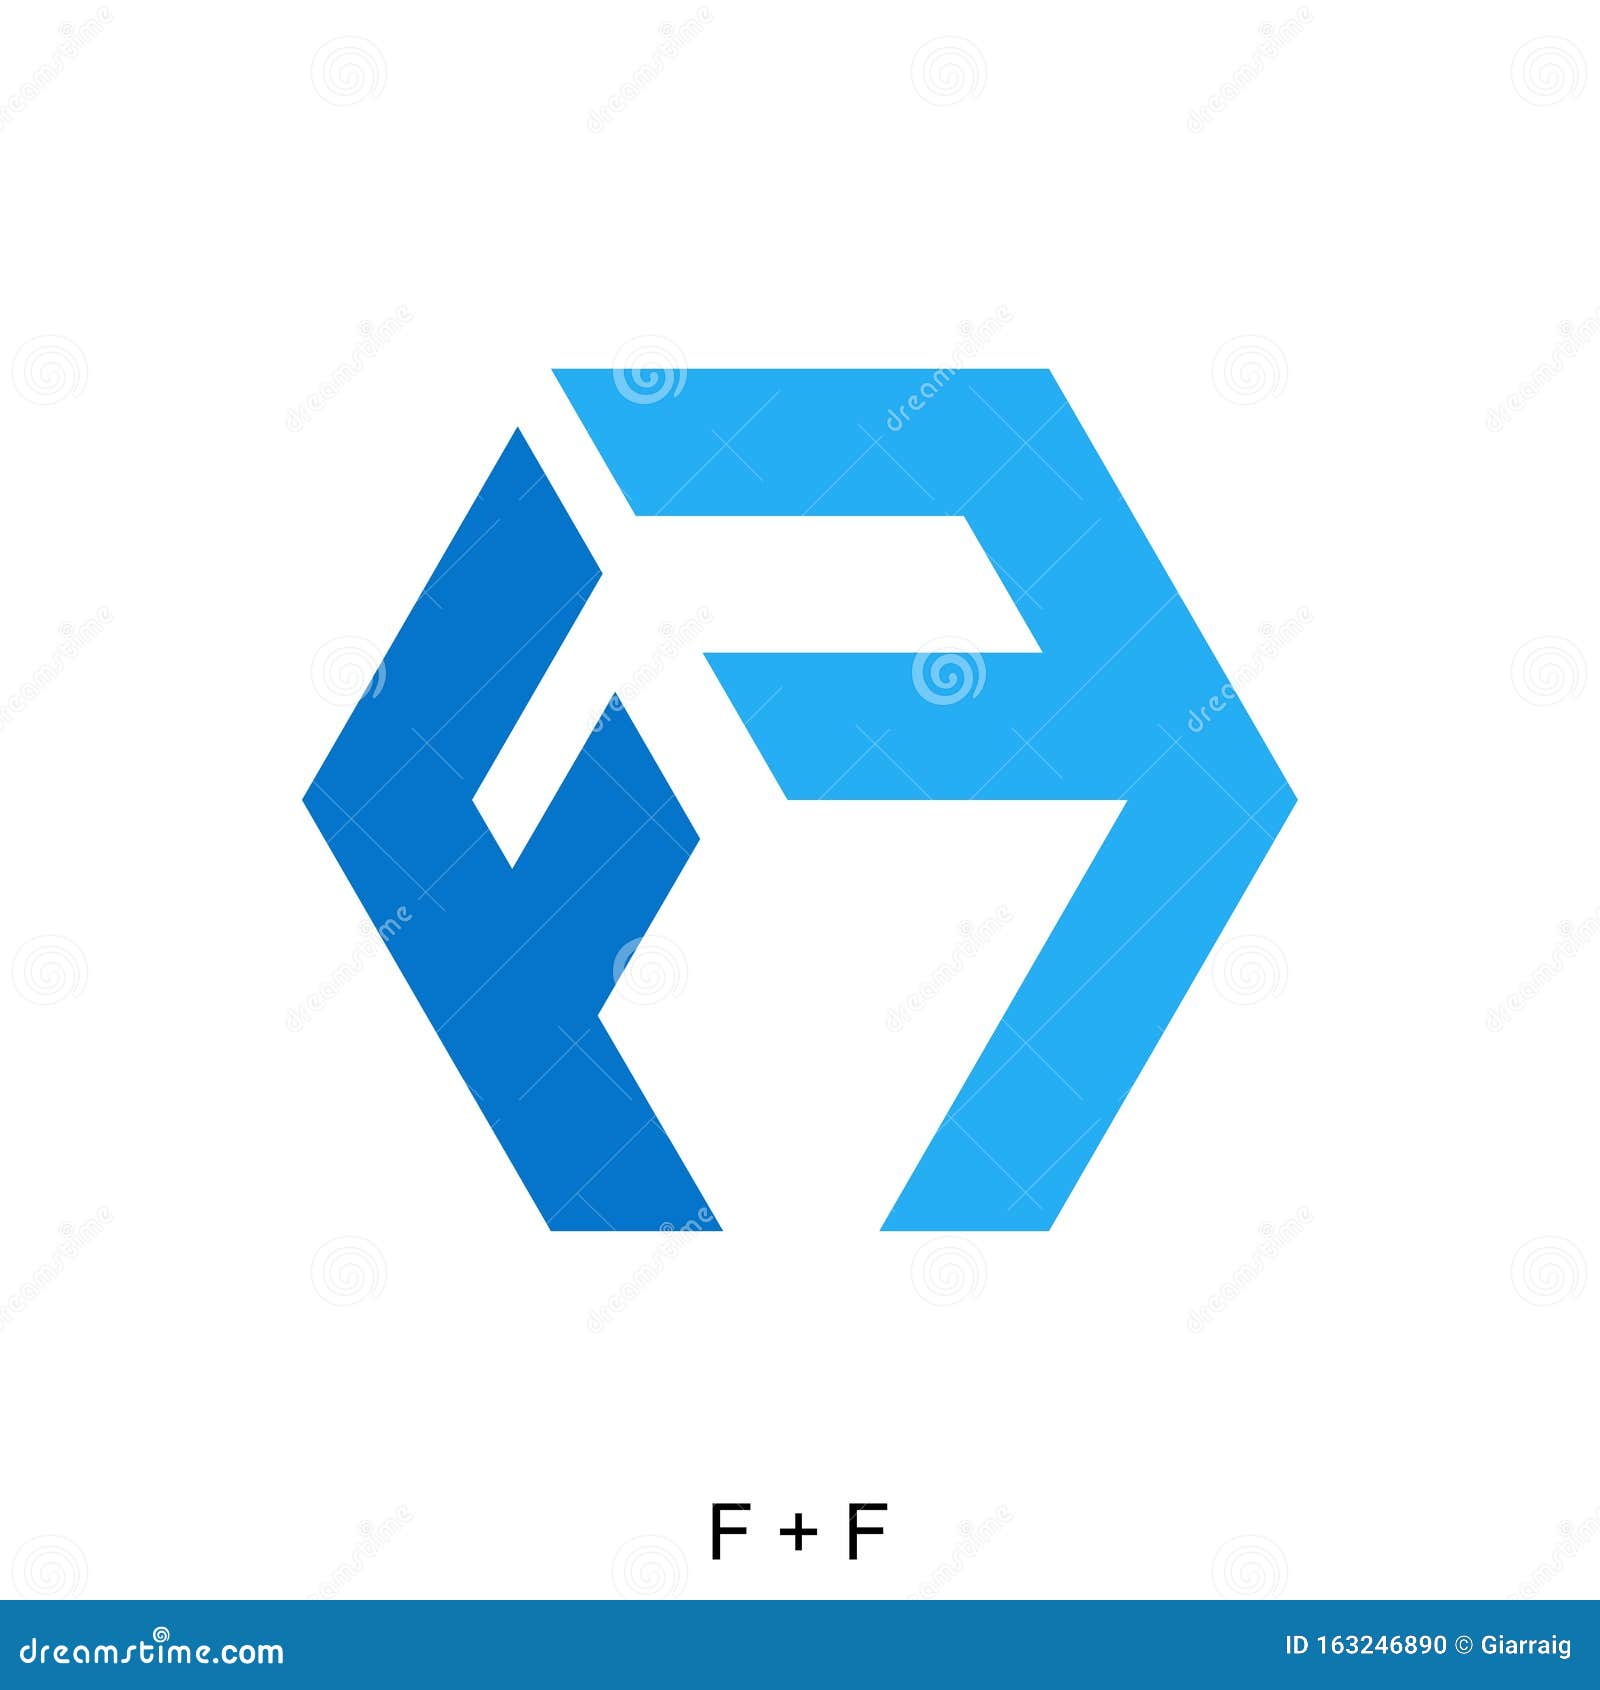  Letter  FF  with hexagon stock vector Illustration of 